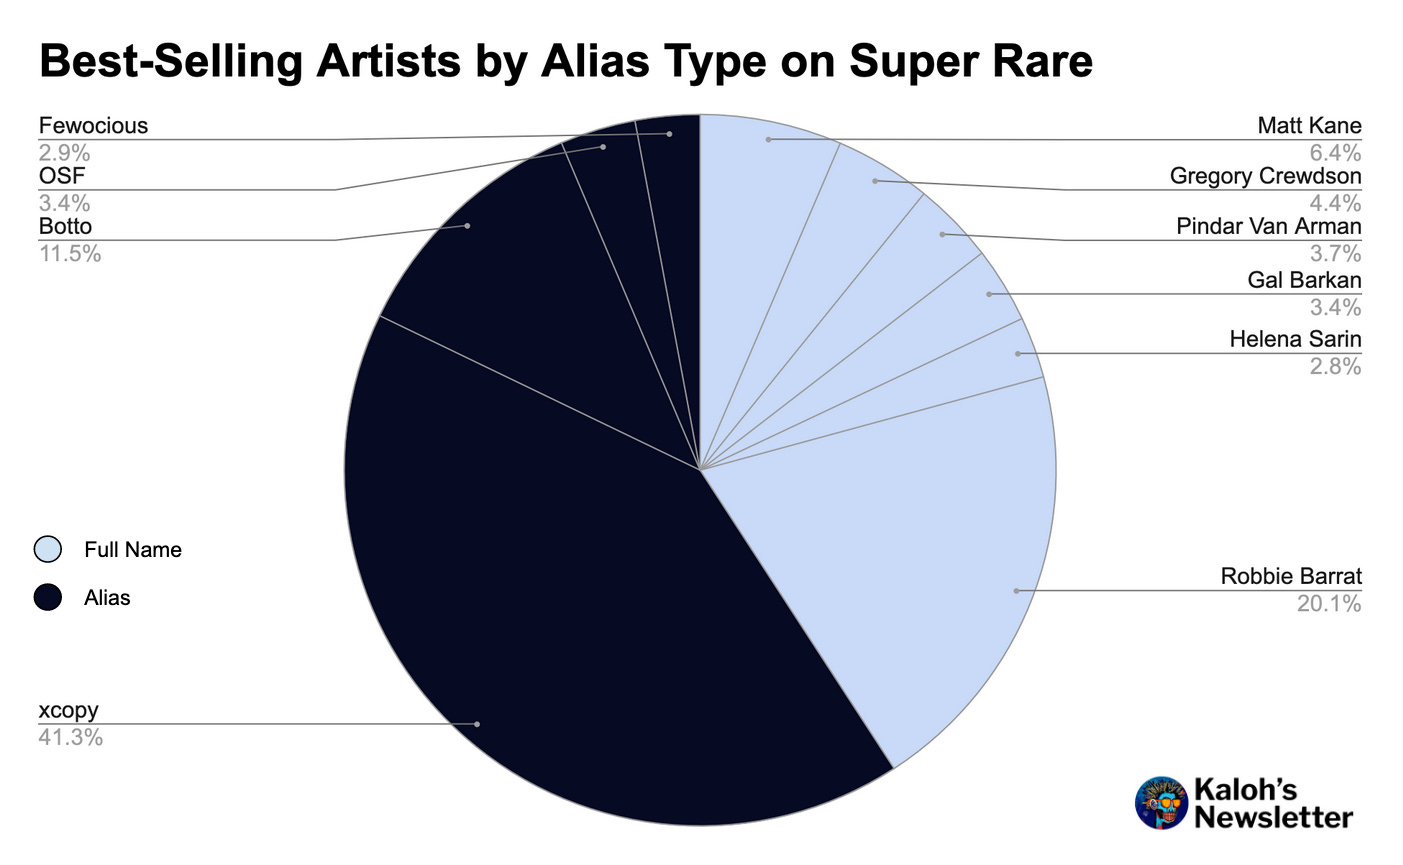 Best-selling artists by alias type on Super Rare from October 2022 to October 2023.